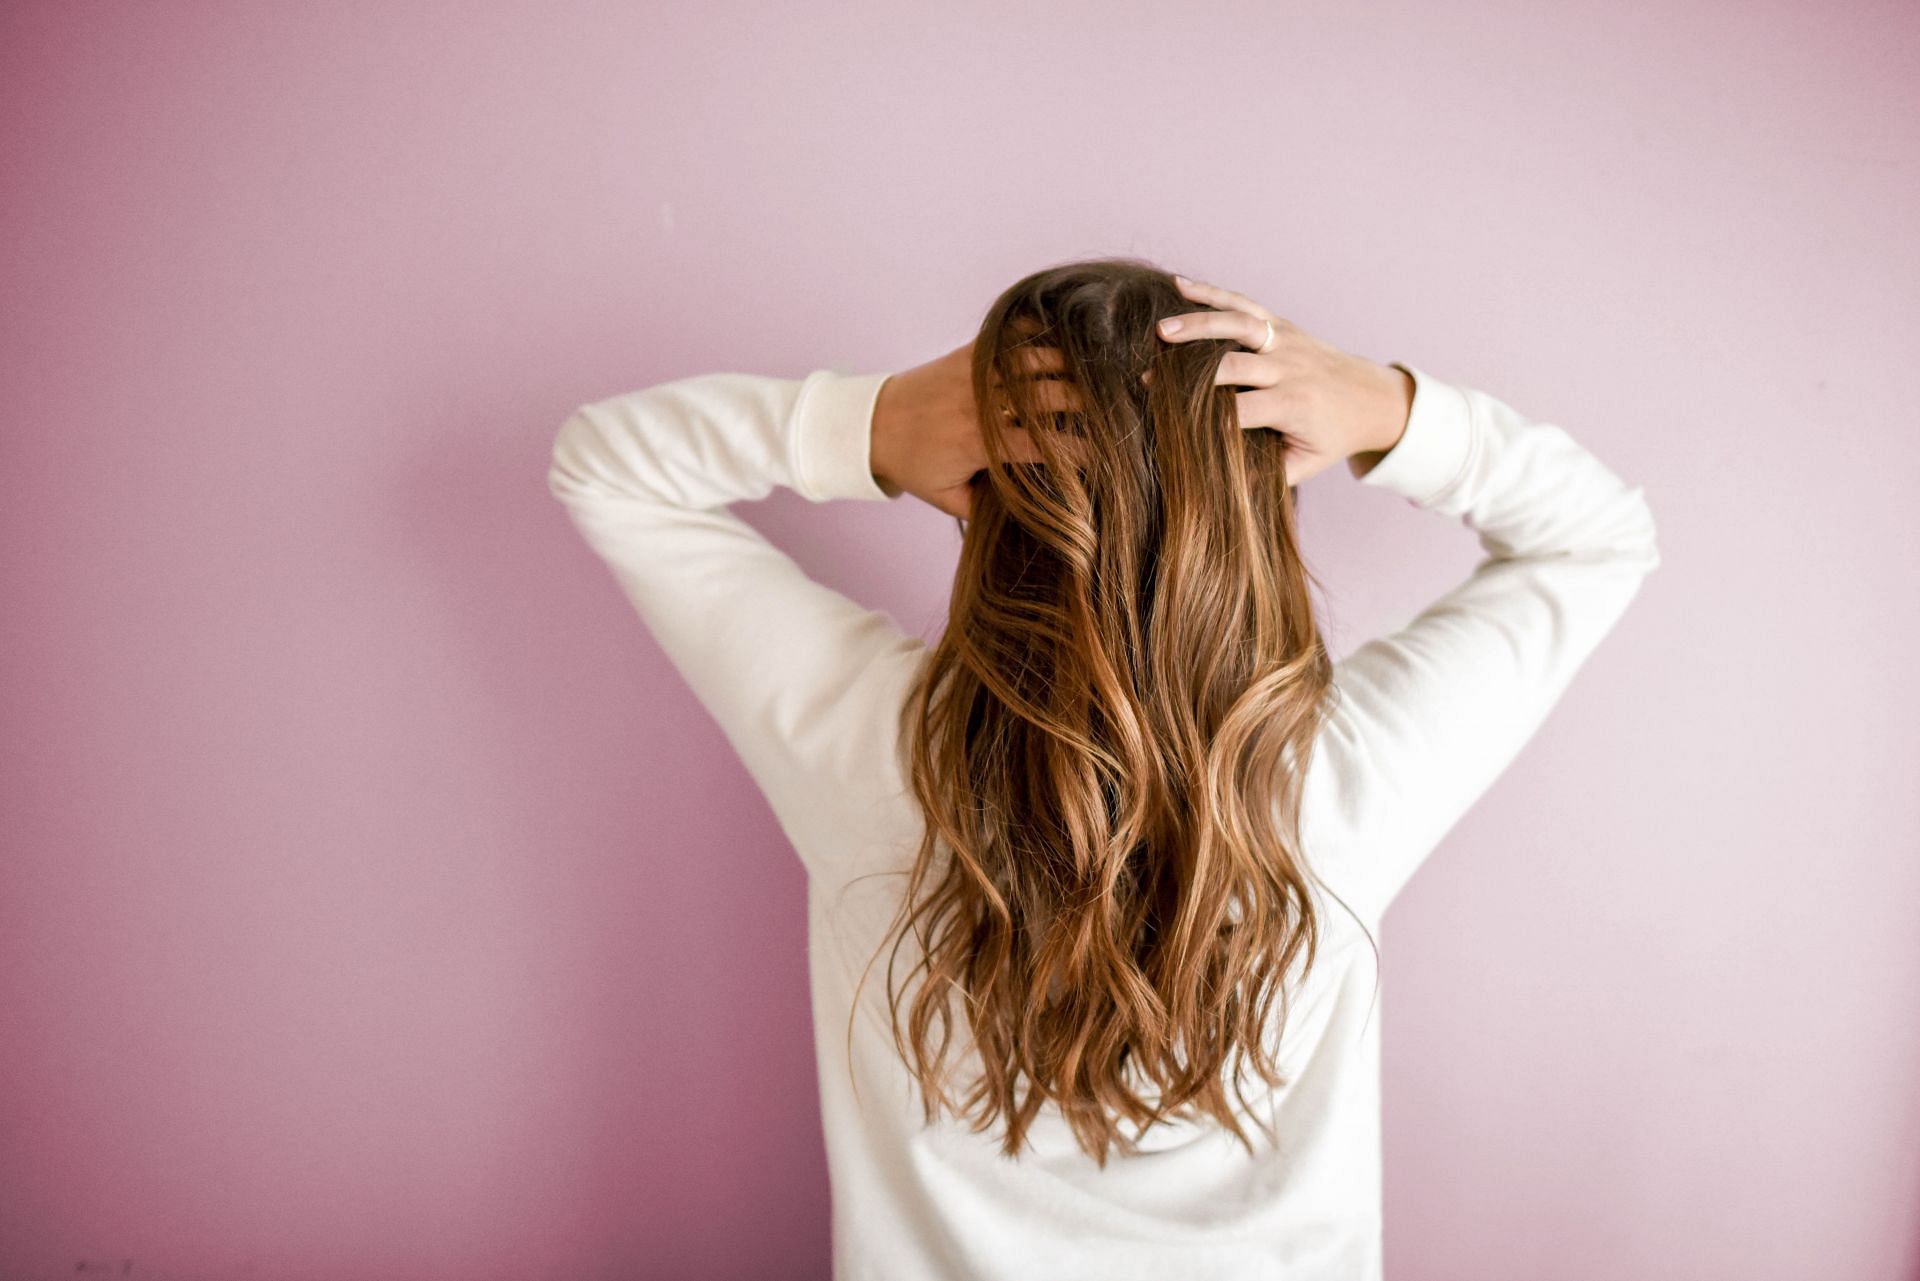 Yoga for Hair Growth: 5 Best Poses to Try